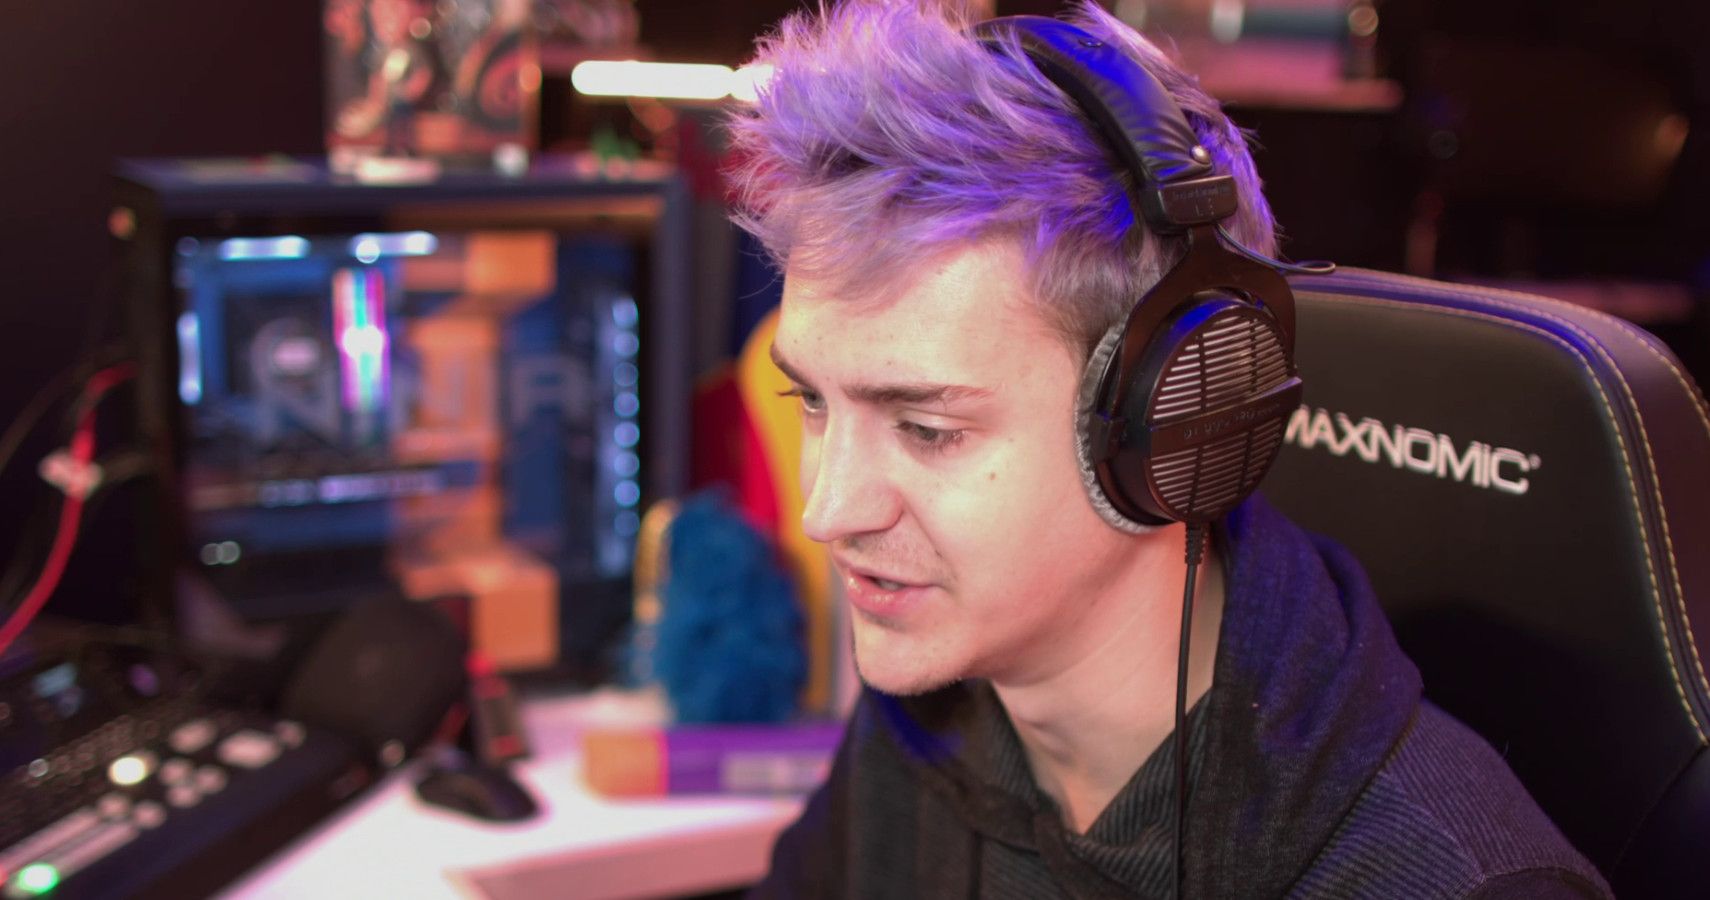 Ninja Brought More Streamers to Mixer, but Not More Viewers